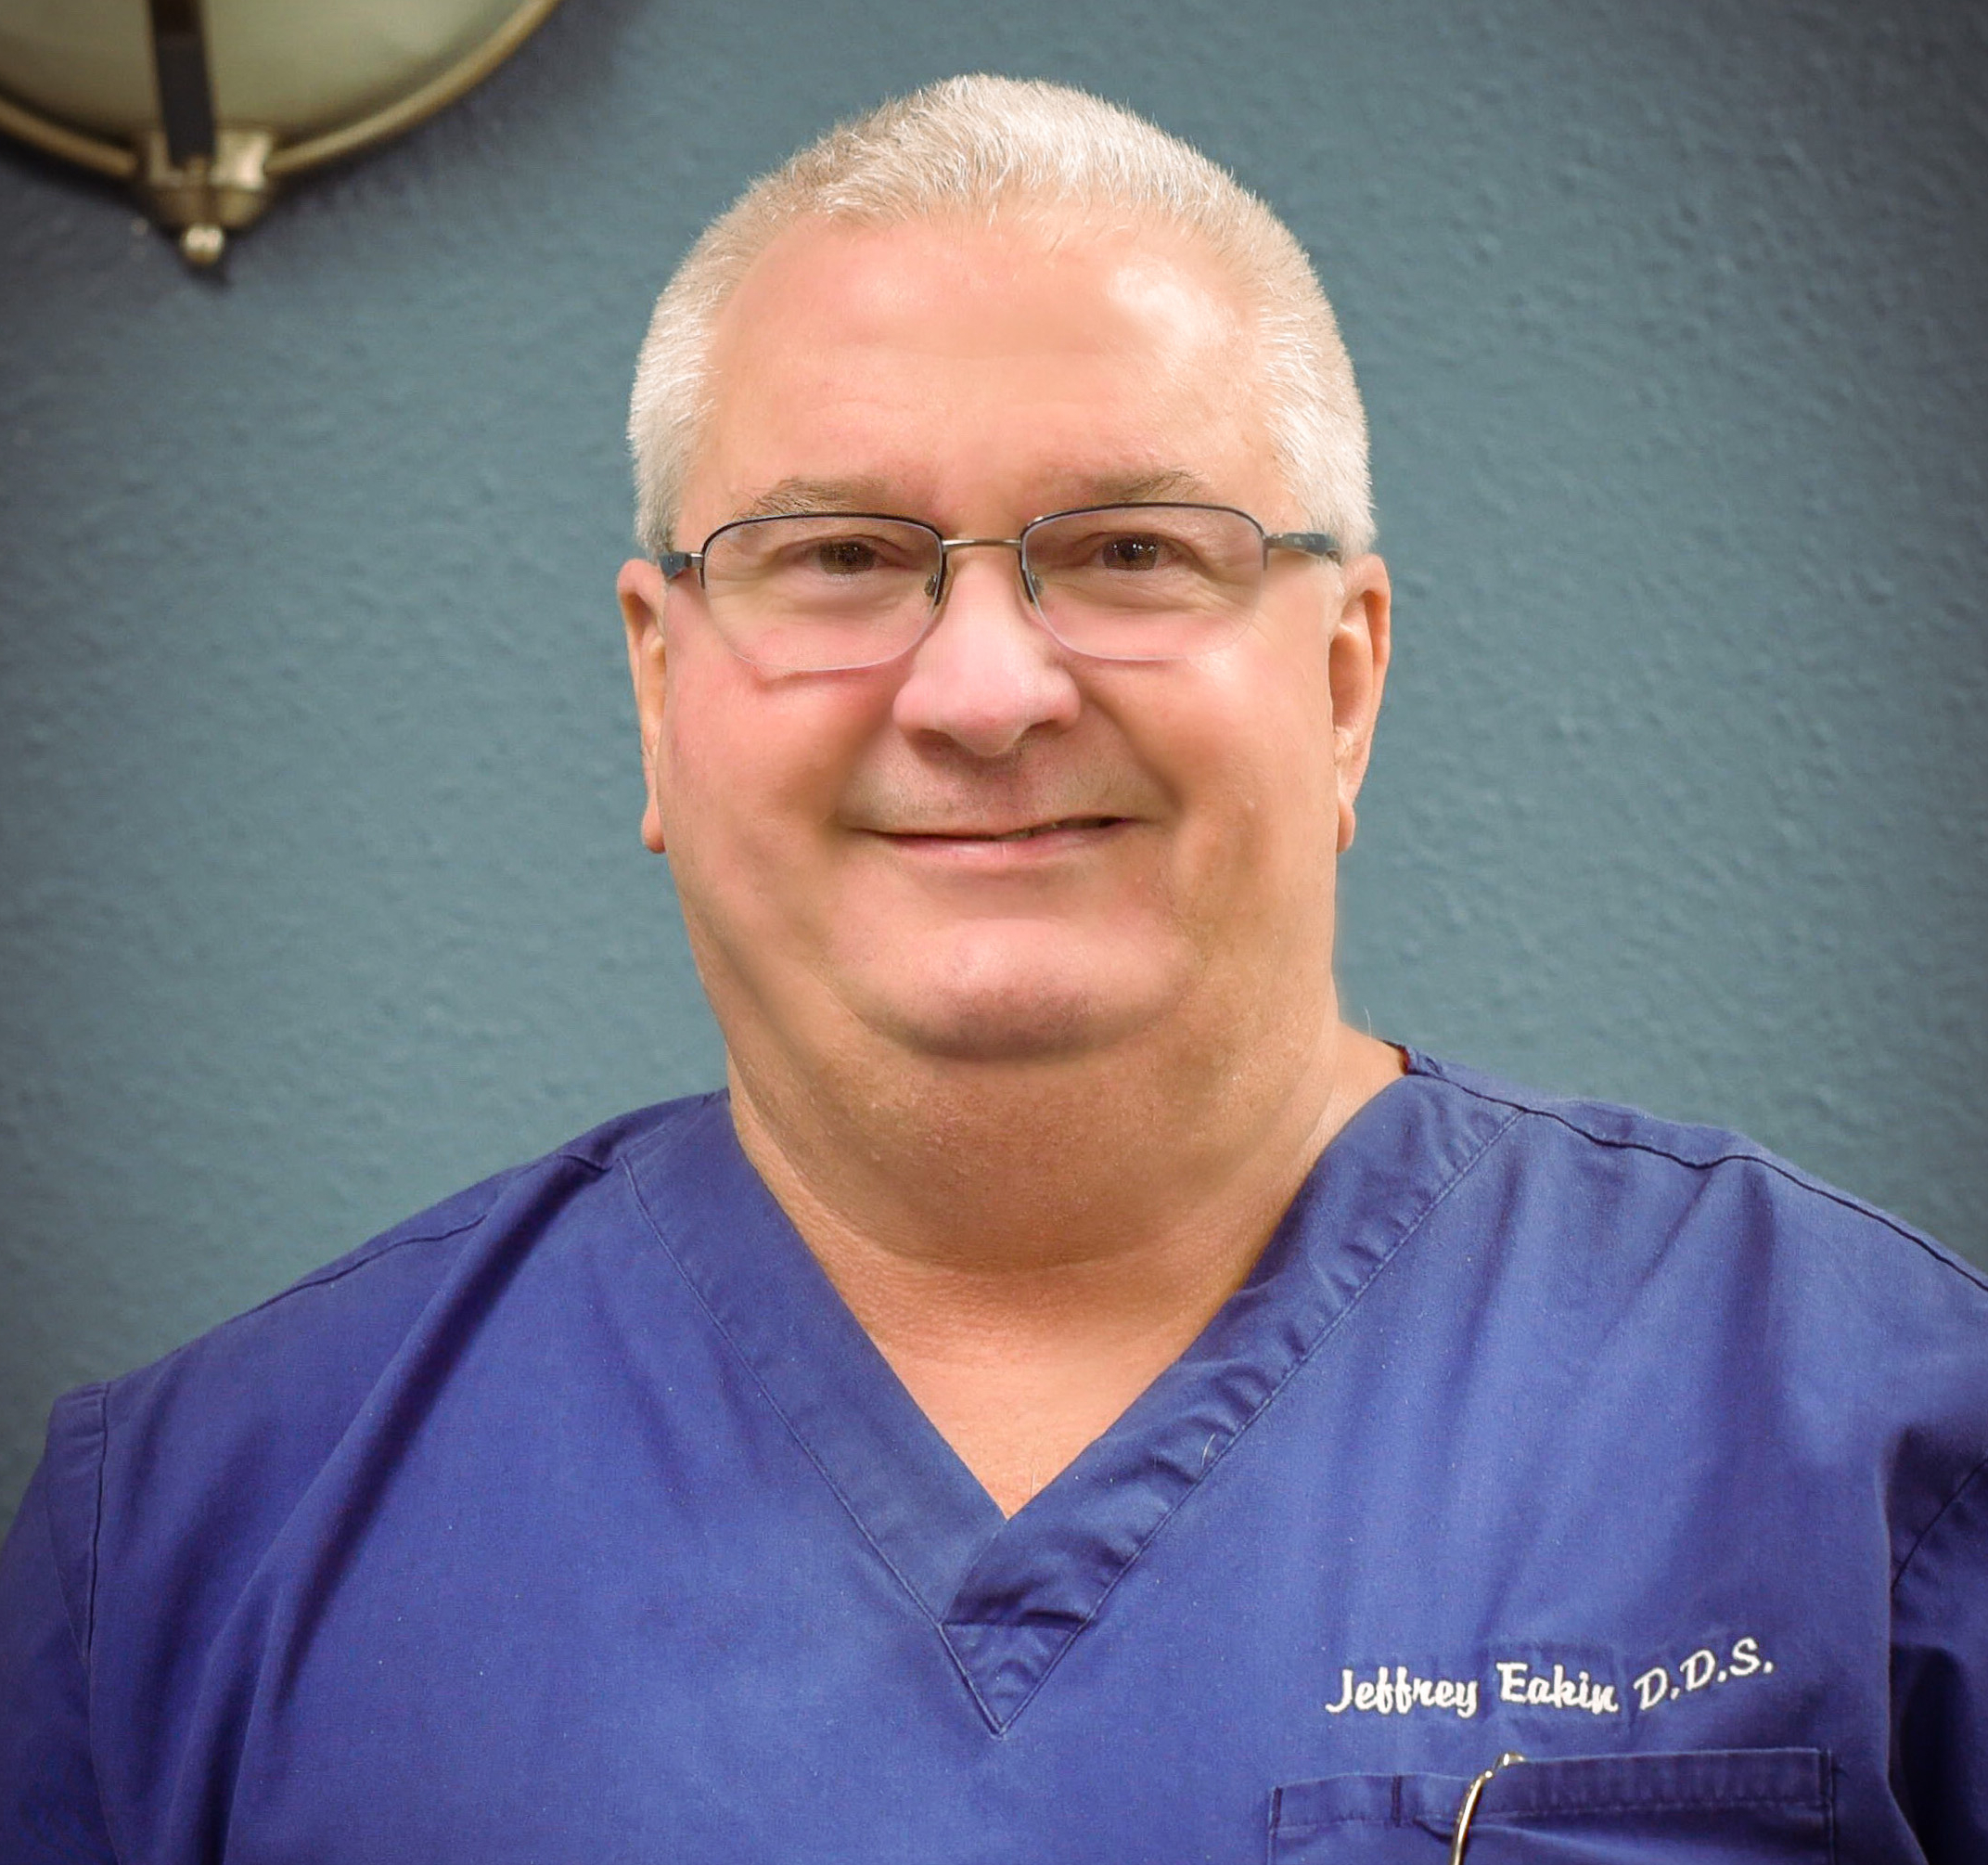 Book your implant consultation with Dr. Eakin at Castle Dental & Implants.